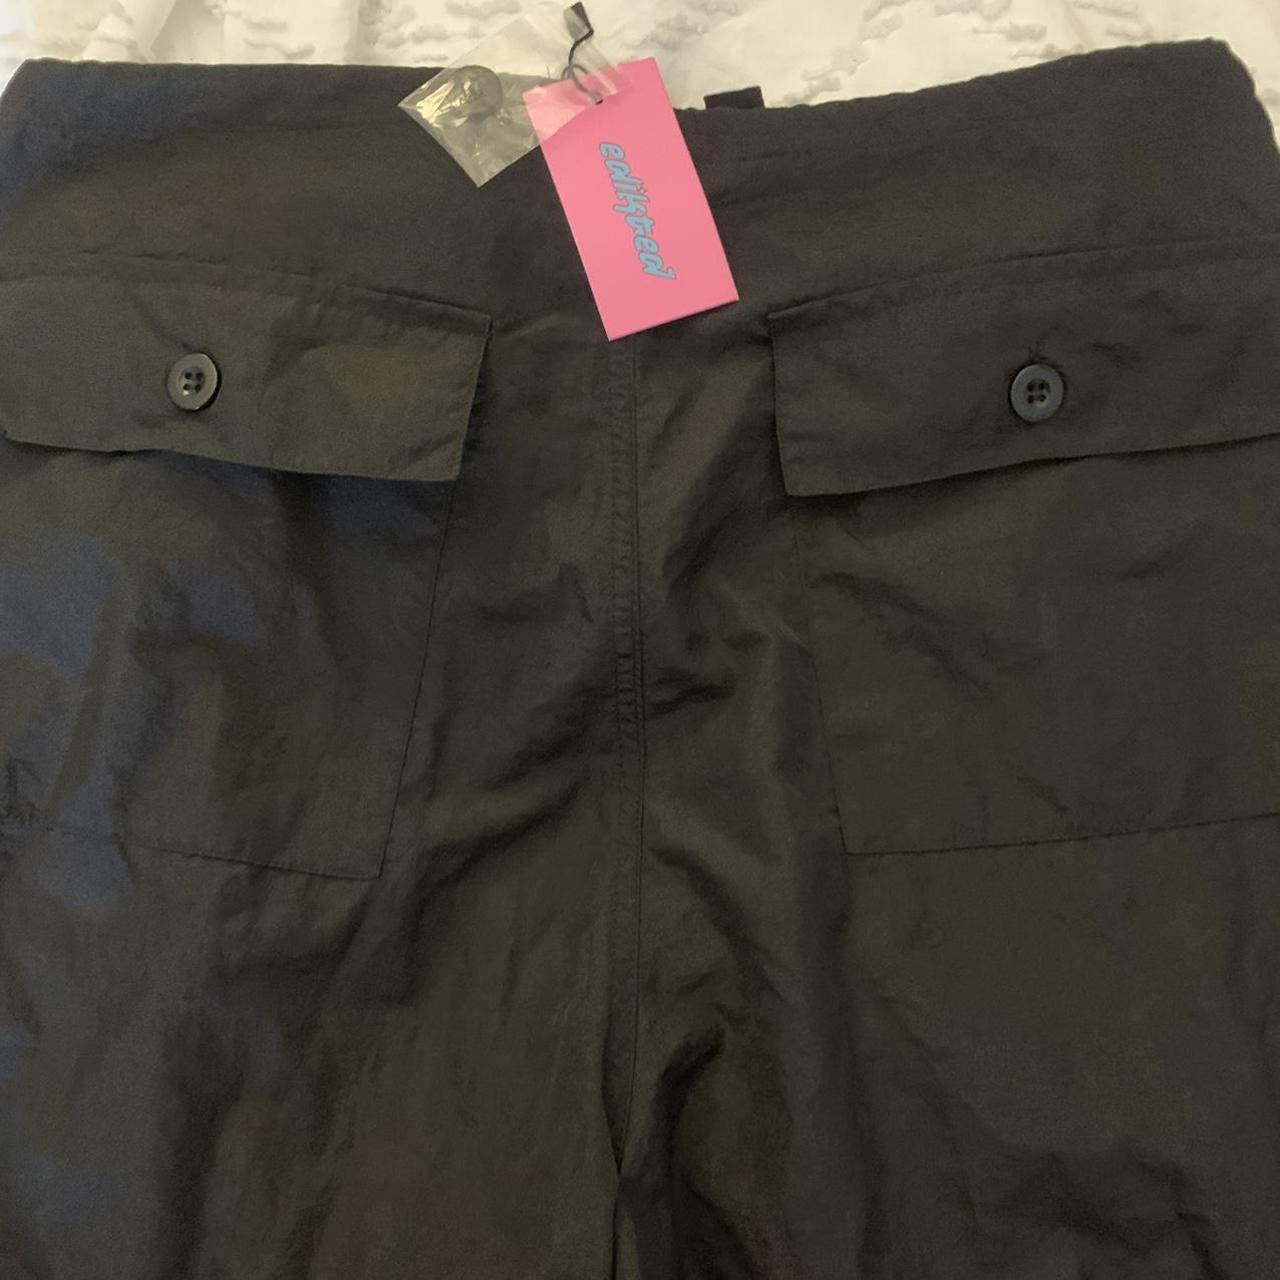 Edikted rian nylon cargo pants new with tags never... - Depop